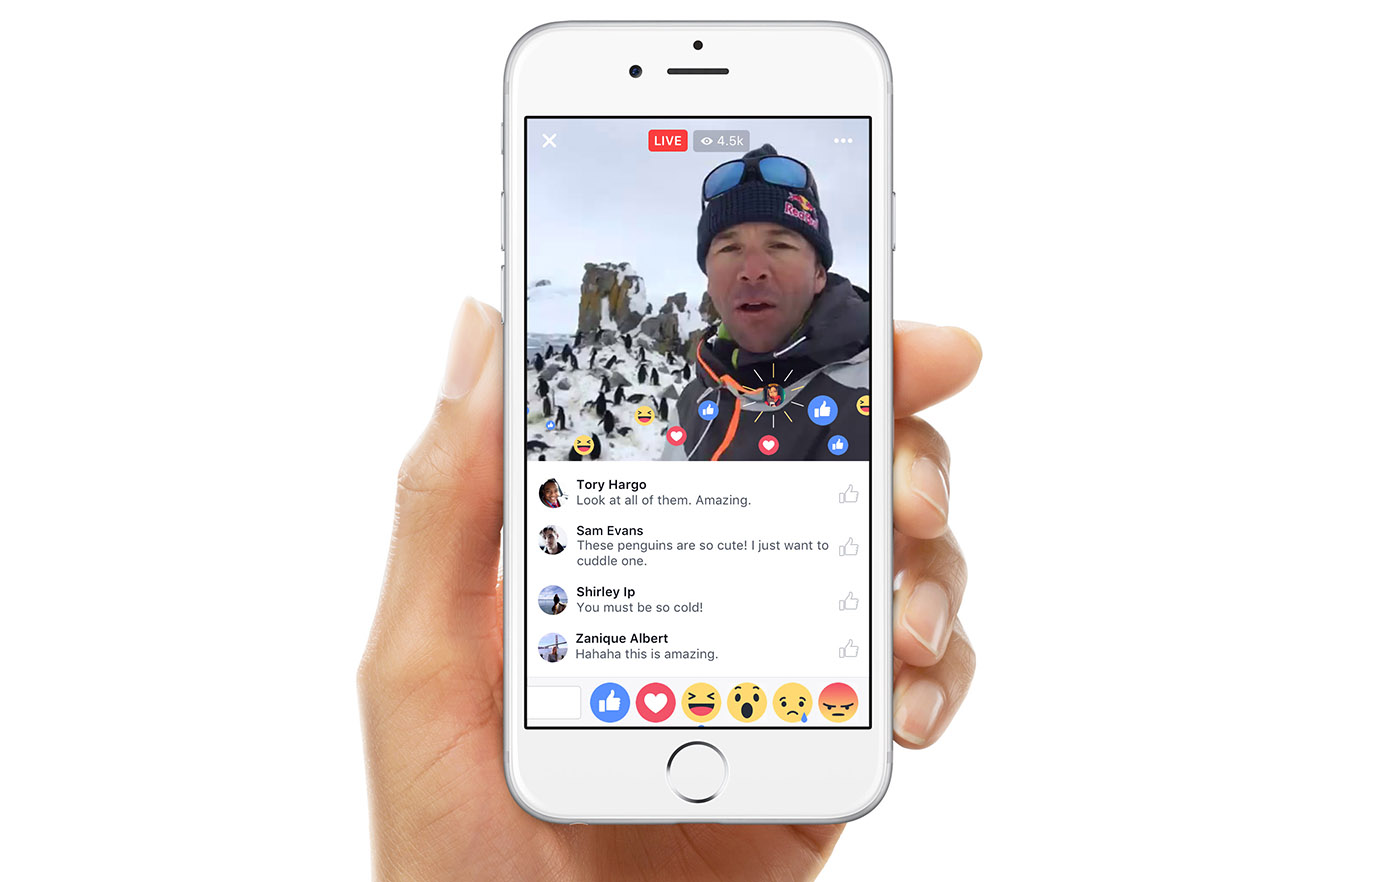 Facebook Live gets a discovery section and instant reactions